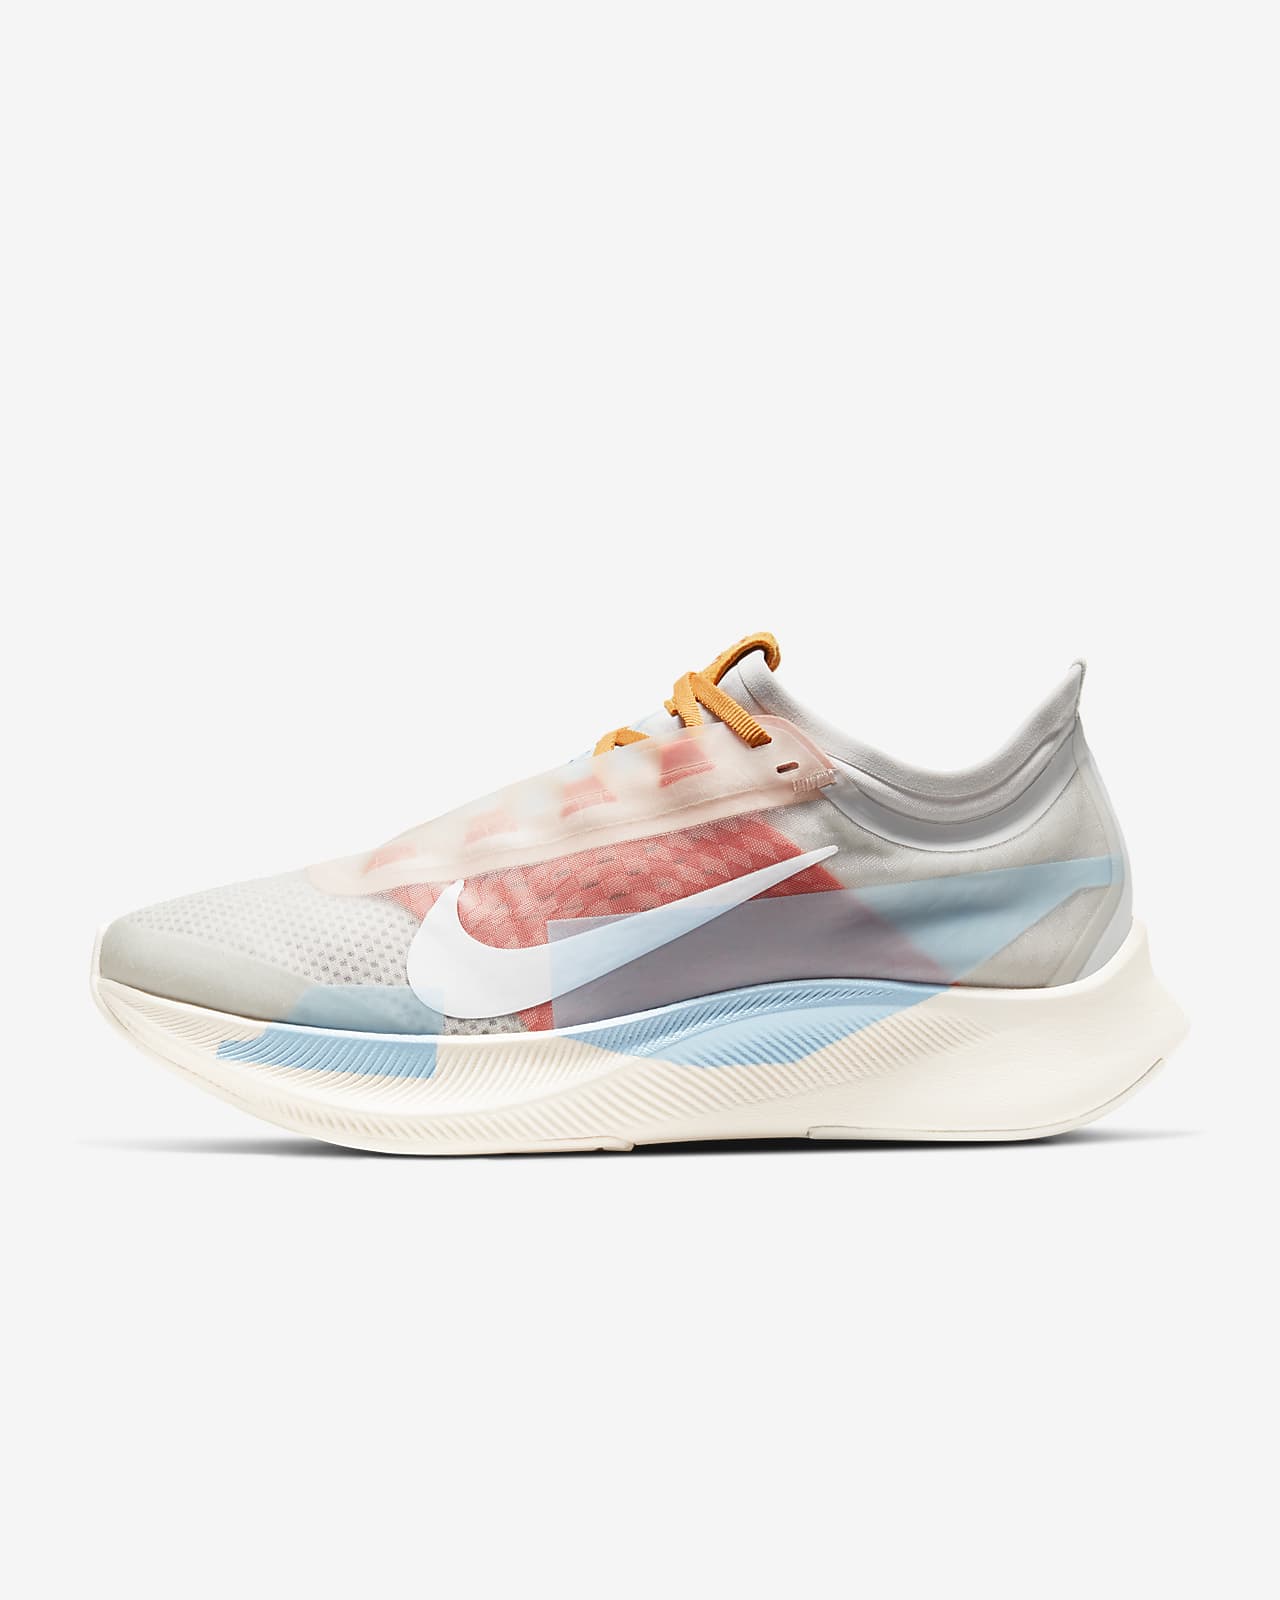 nike zoom fly 3 price